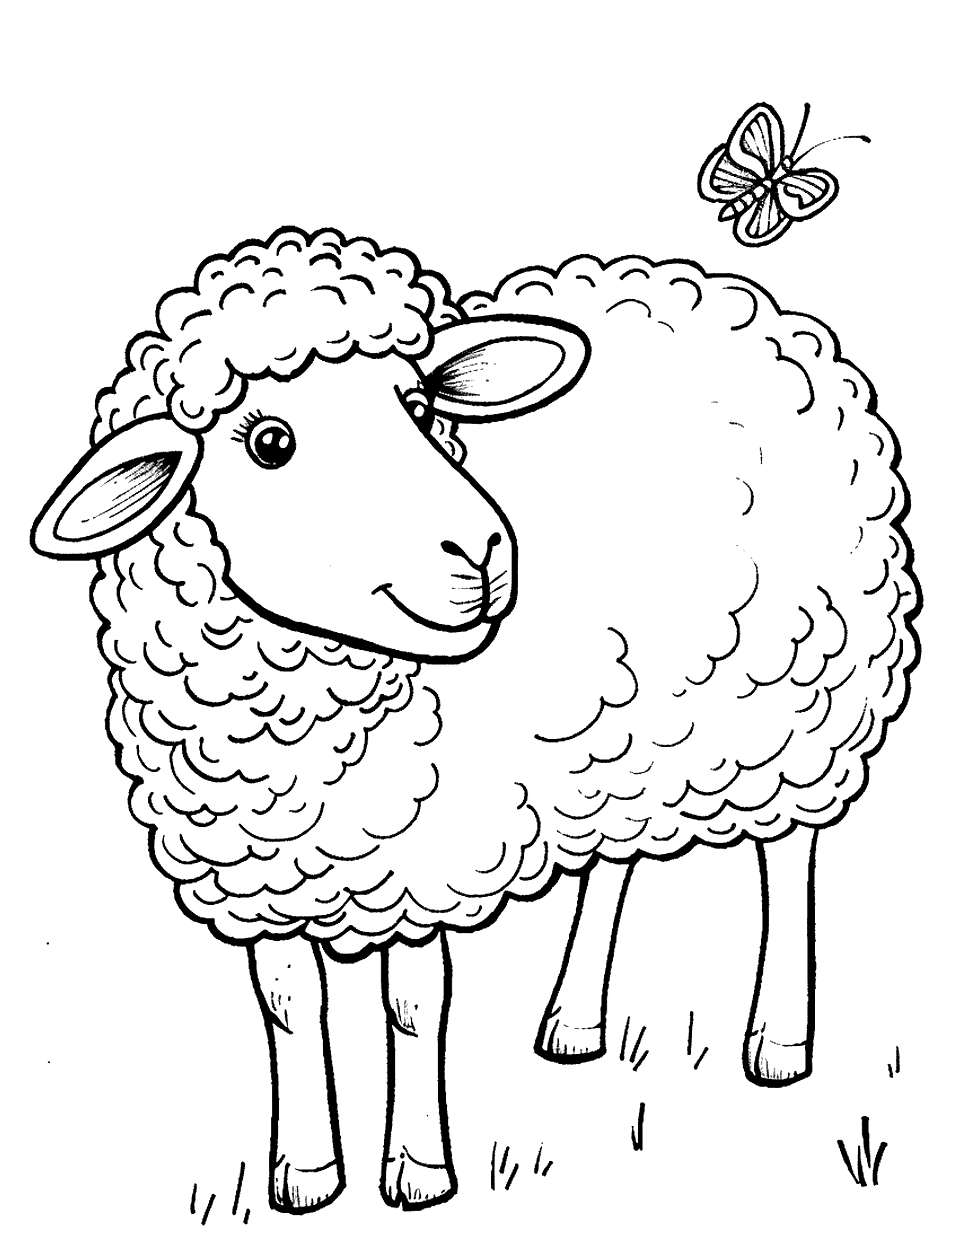 Sheep and a Butterfly Coloring Page - A sheep looking at a butterfly that is flying around.